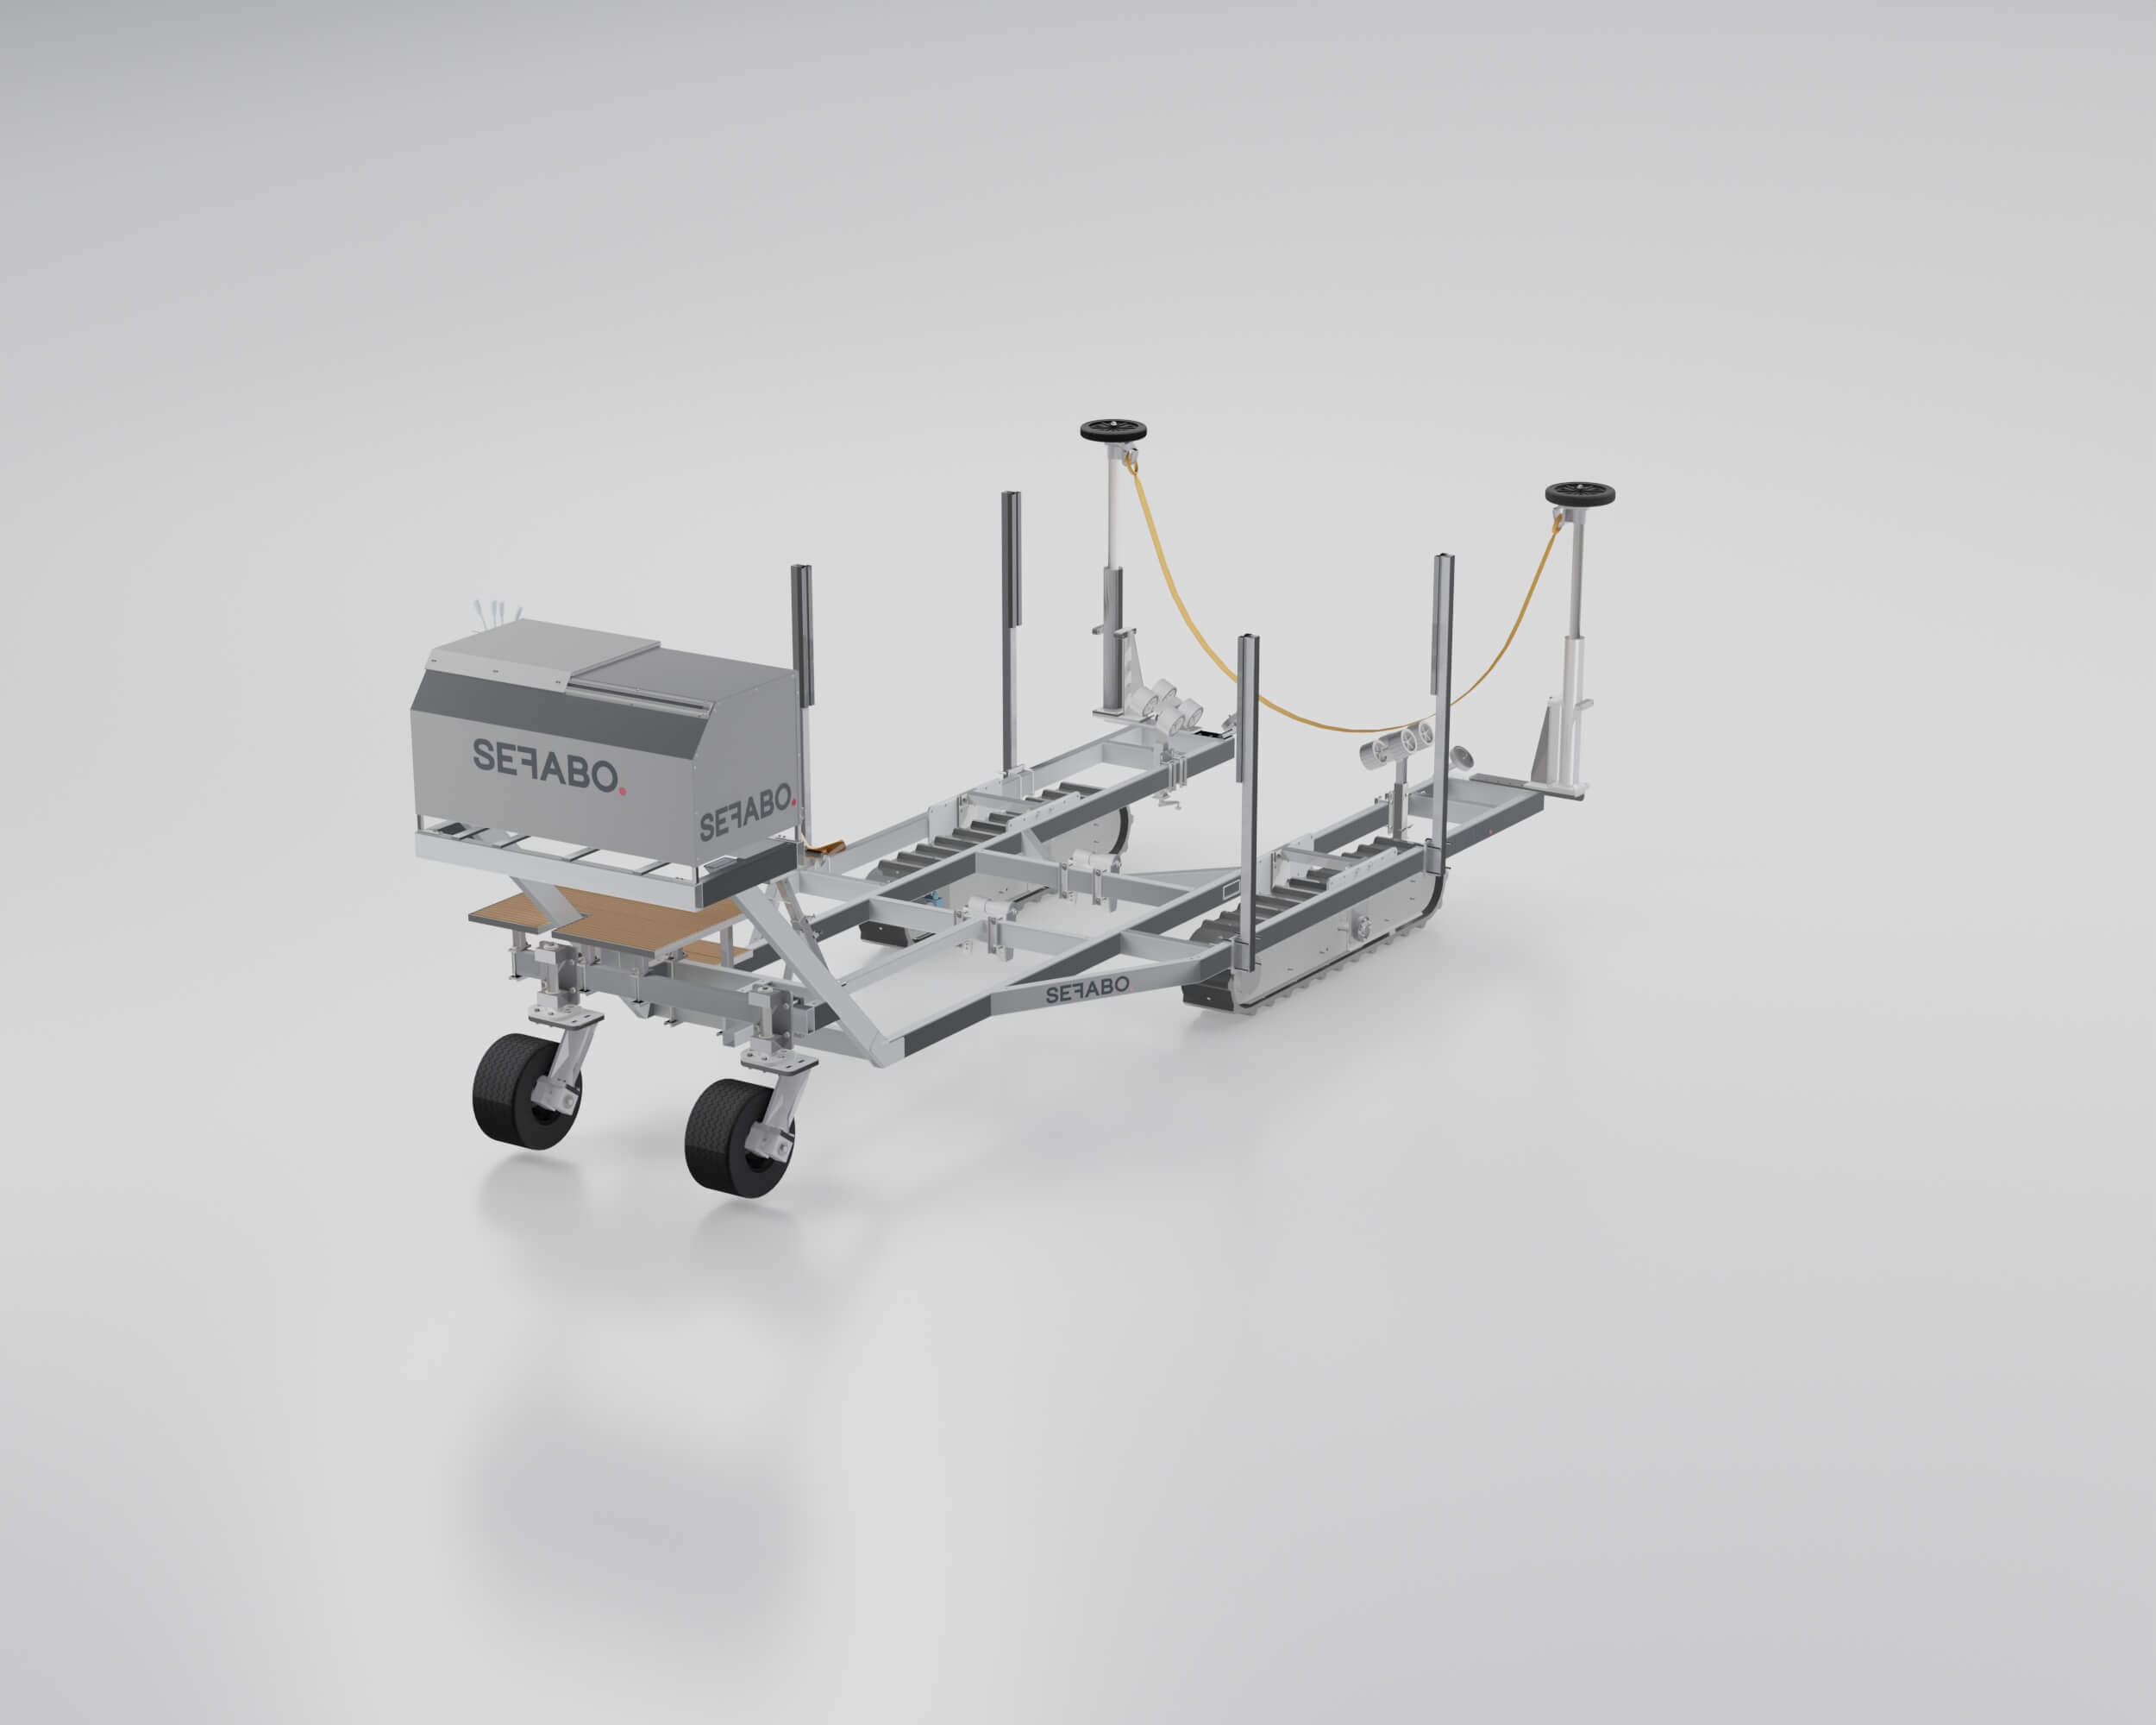 SEFABO boat trailer with caterpillar drive incl. operator's platform and lifting cylinder for easy lowering of the boat.